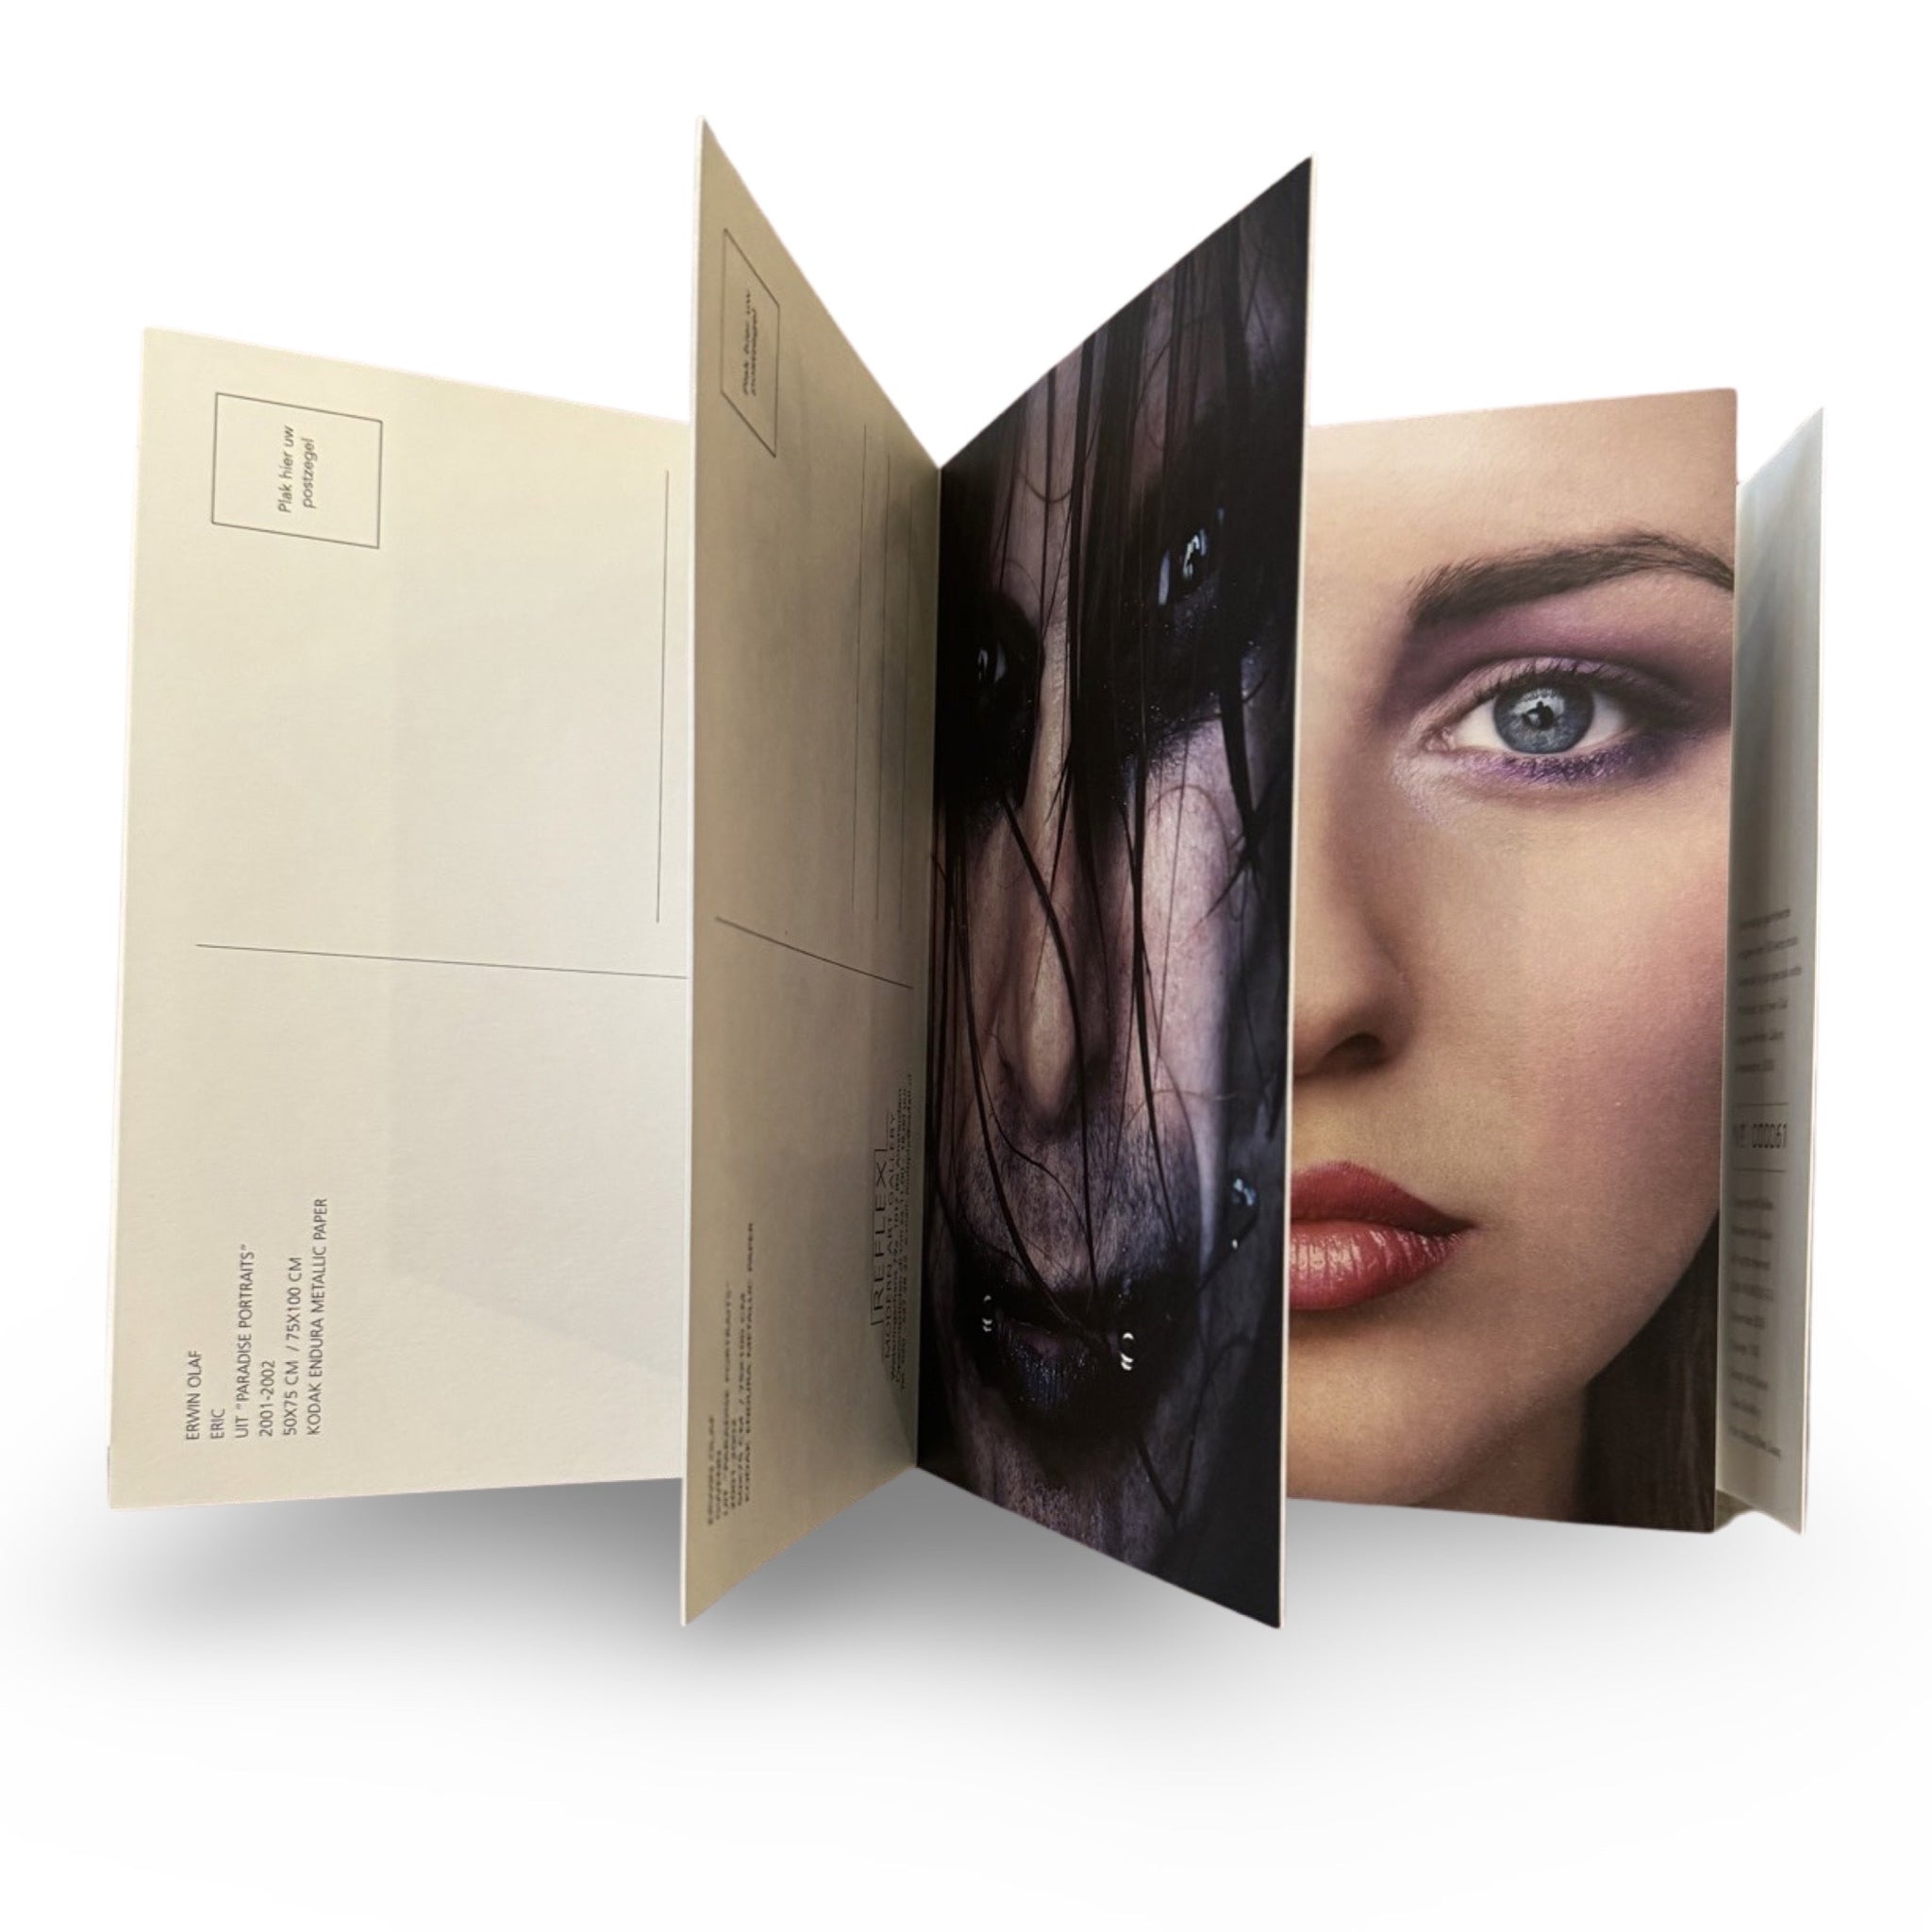 Erwin Olaf - Paradise Portraits, Harry | complimentary Paradise Portraits collectors book included